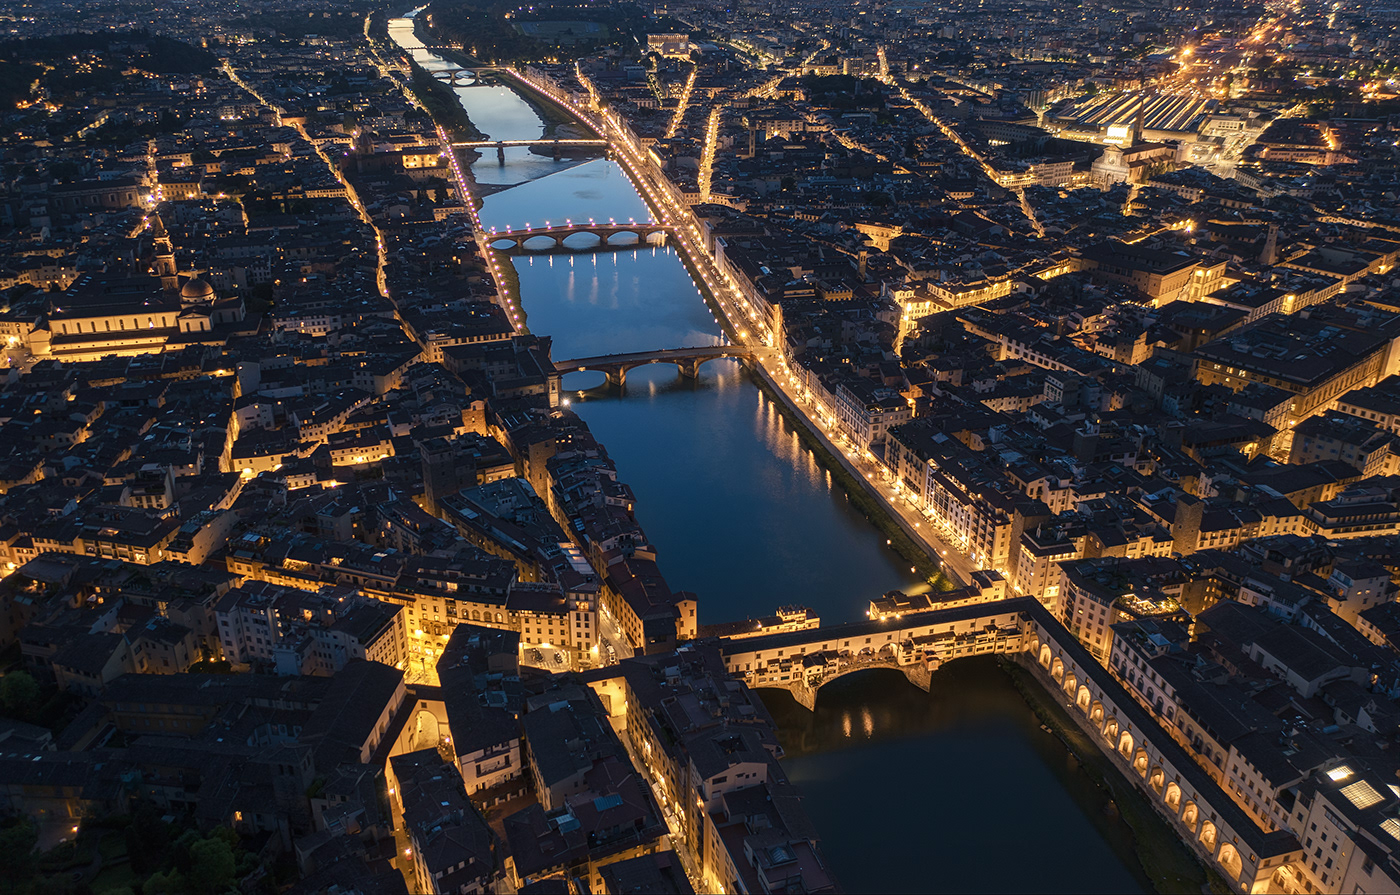 The Bridges of Florence